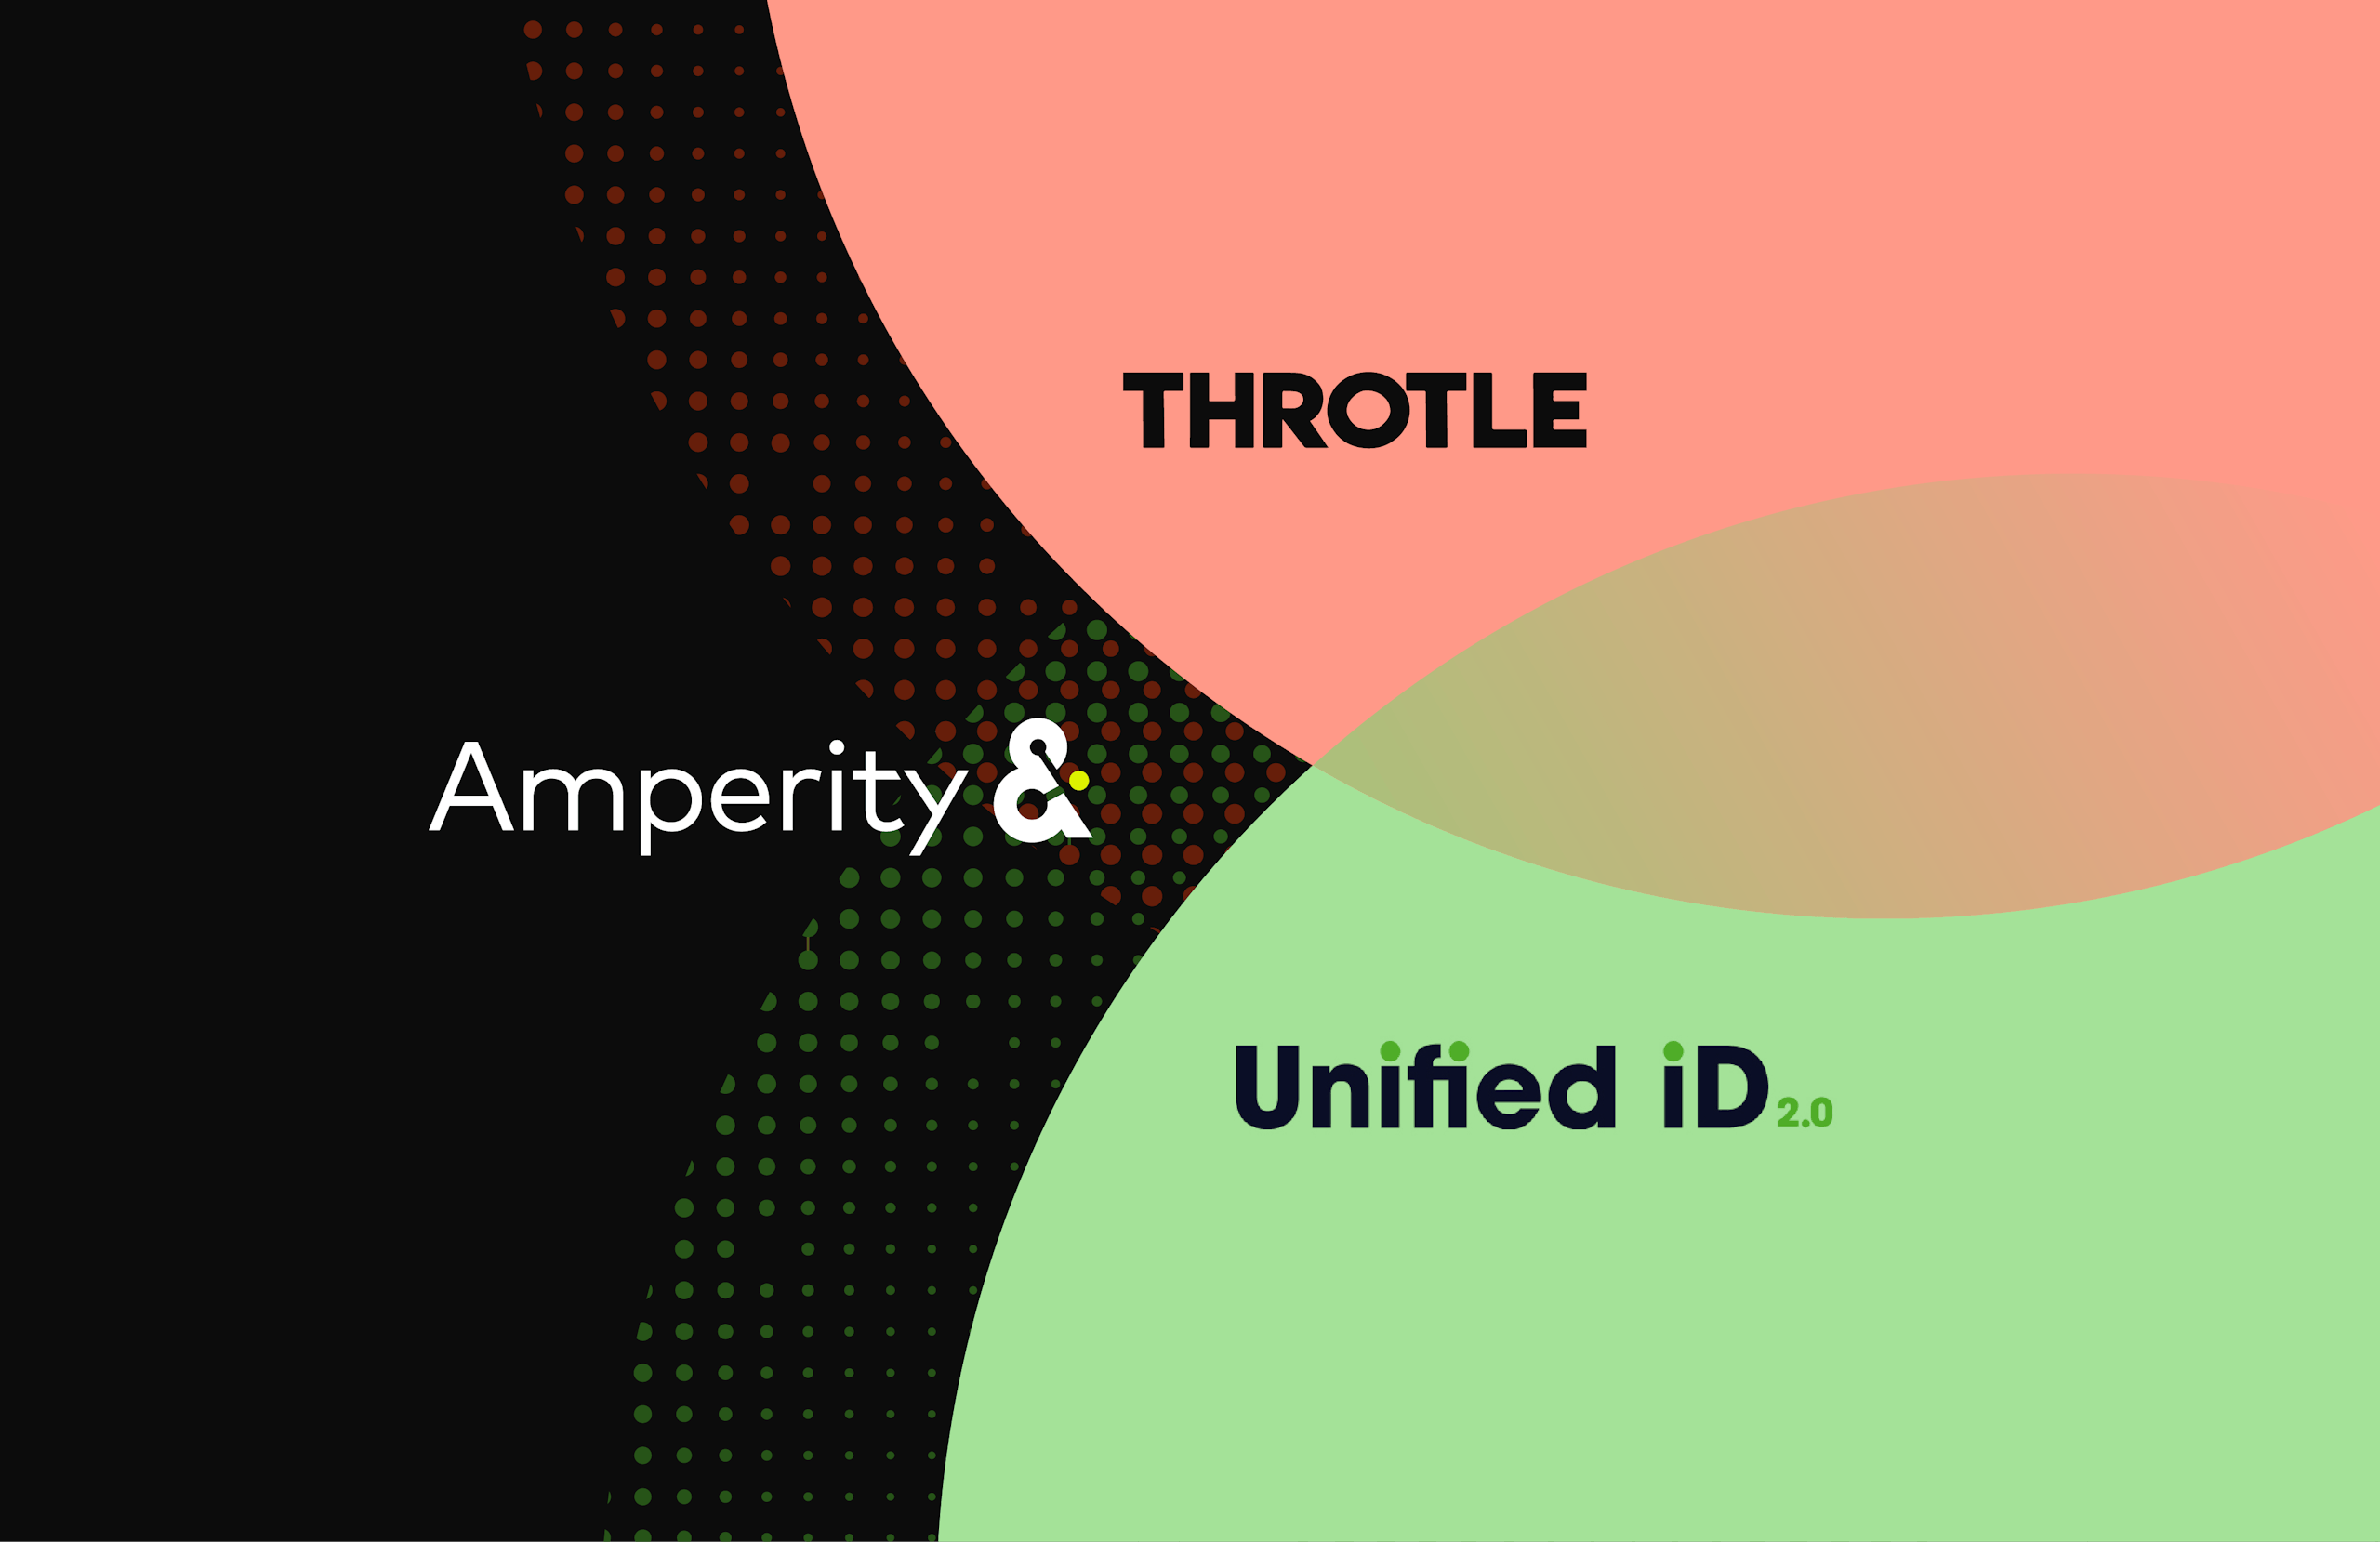 Image displaying Amperity, THROTLE, and Unified iD. 